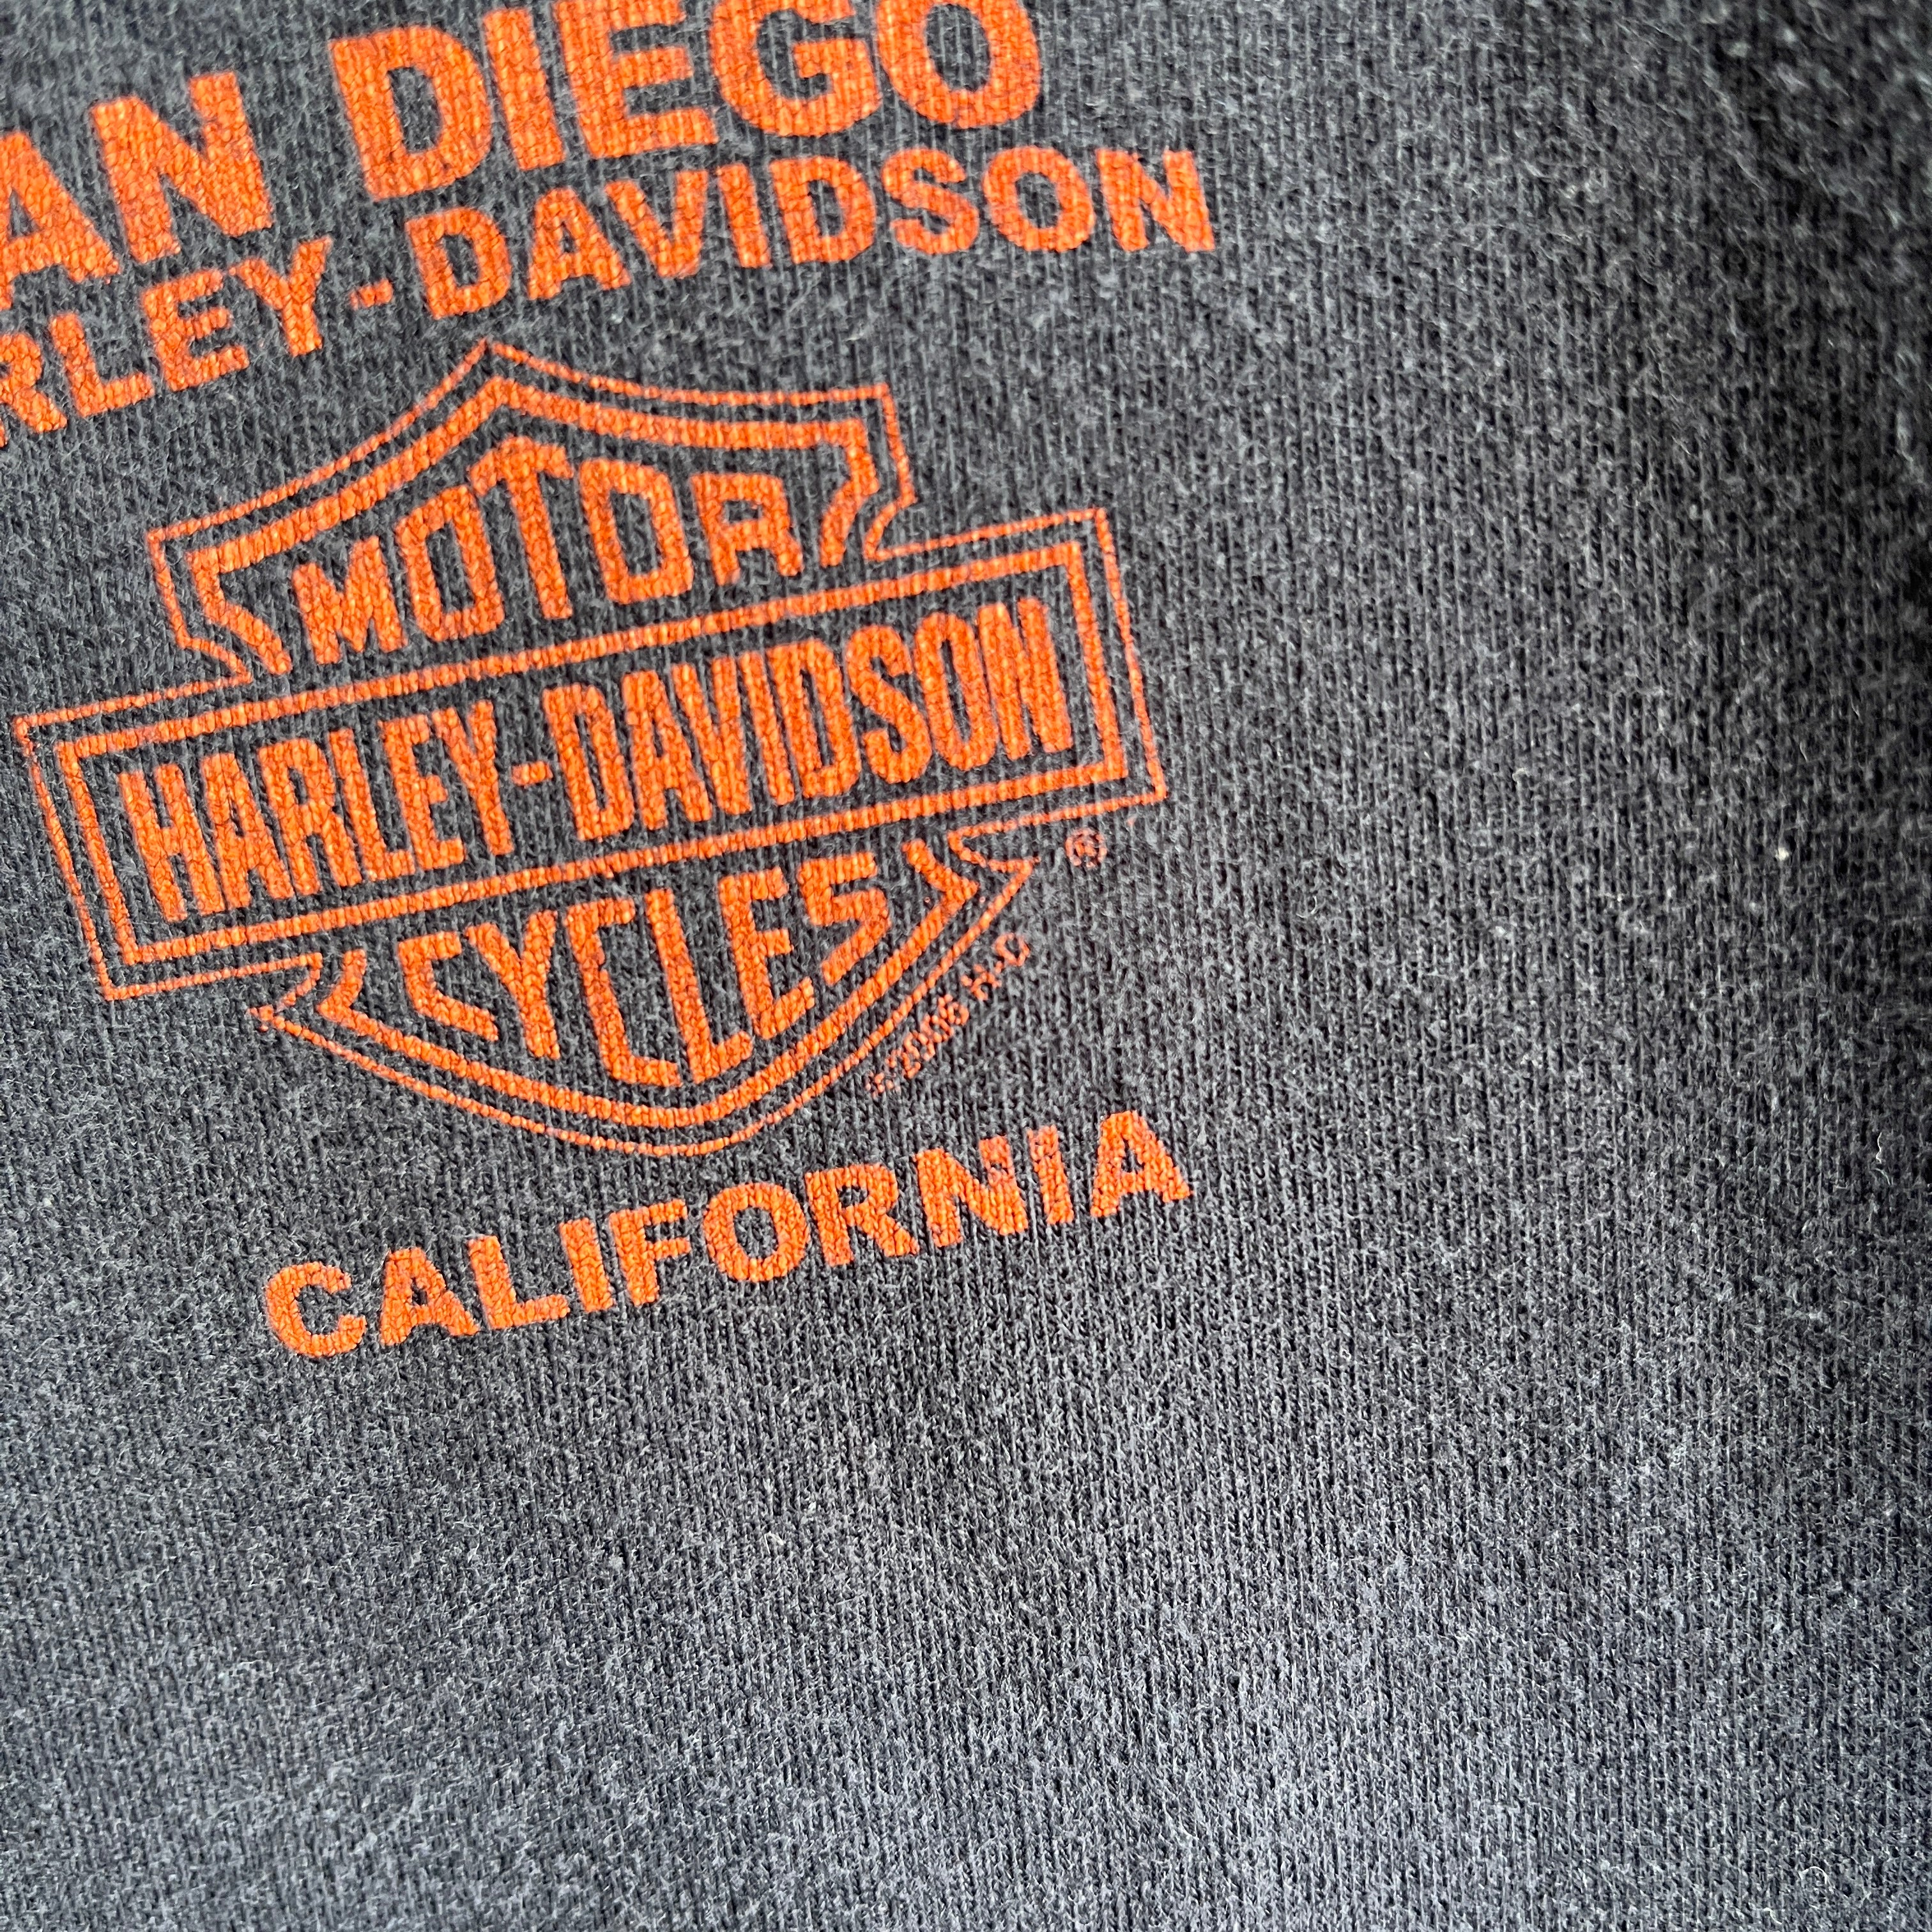 2006 Harley San Diego Cotton Front and Back T-Shirt